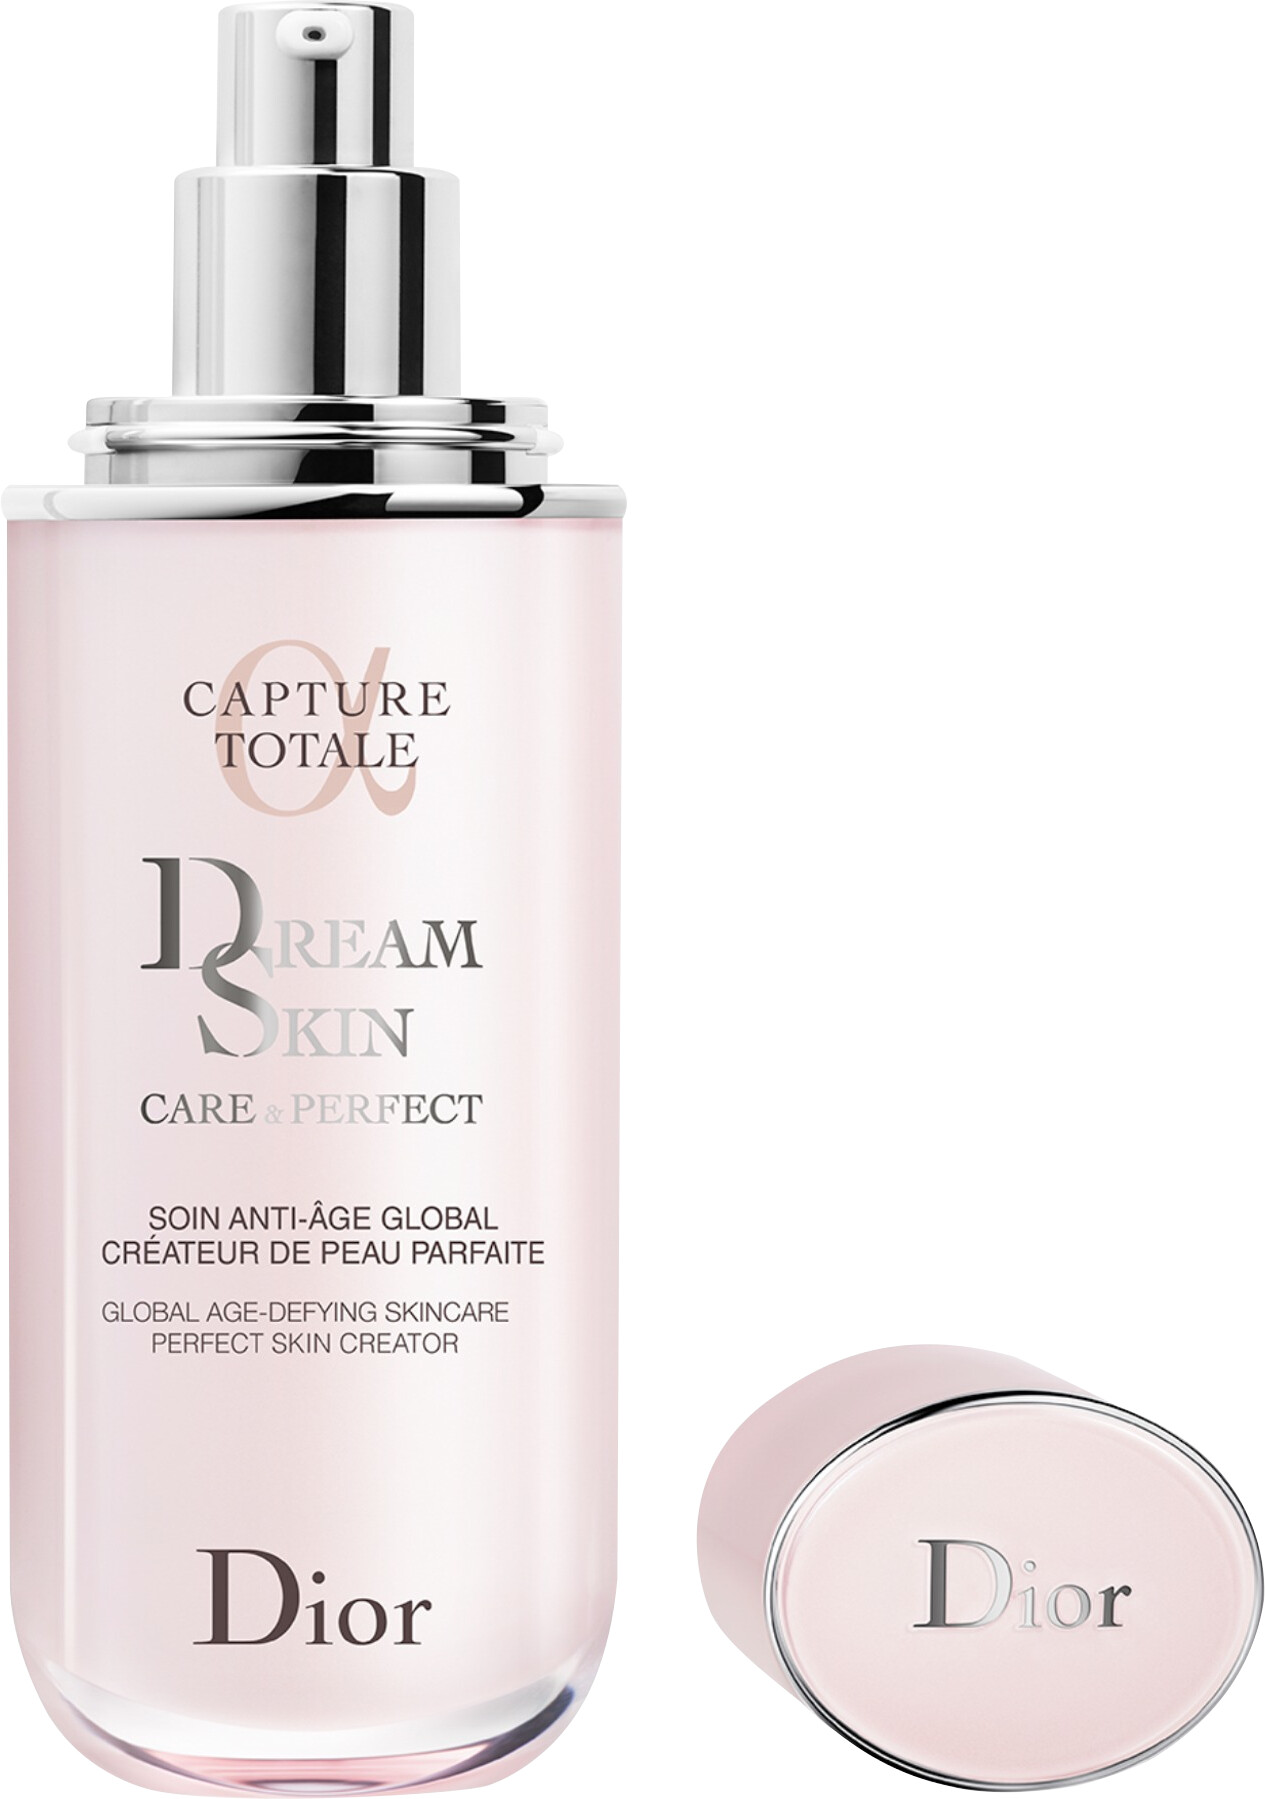 DIOR Capture Totale Dreamskin Care and 